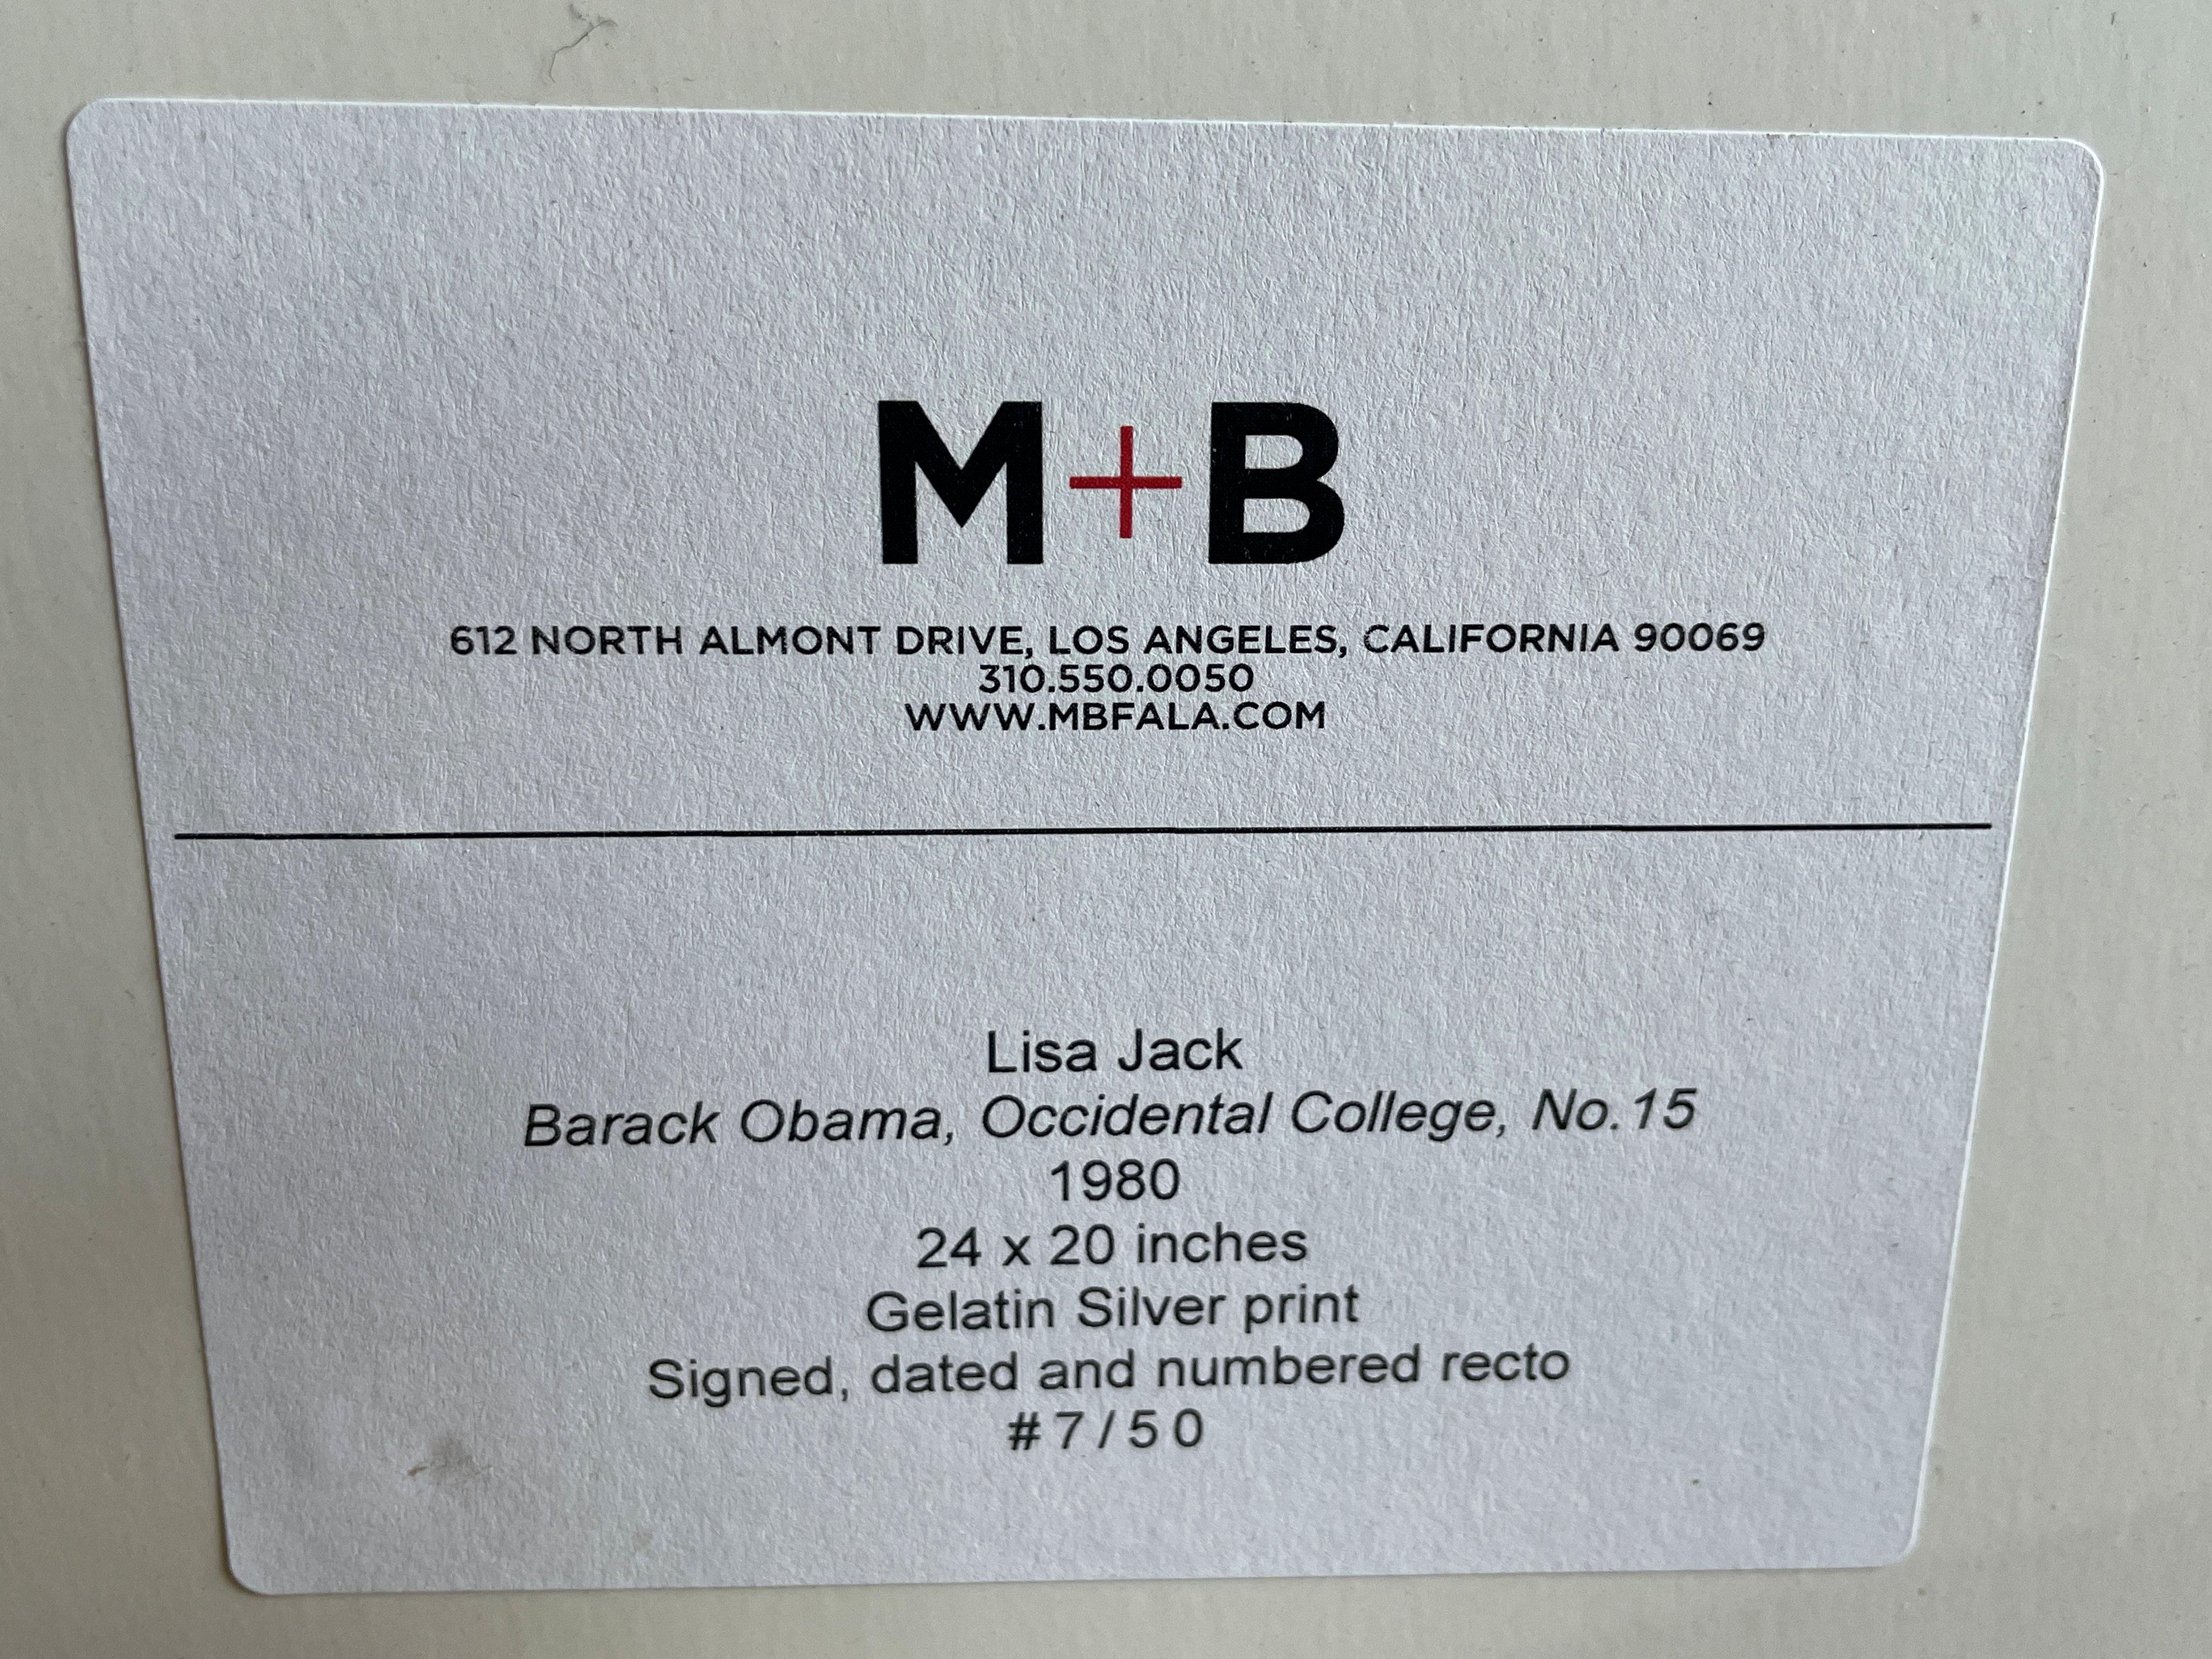 Lisa Jack
Barack Obama, Occidental College, No. 15, 1980
Signed, dated, and numbered on the reverse
Gelatin silver print
Sight 21 1/2 x 14 1/2 inches
Edition 7/50

Provenance:
M&B, Los Angeles

In 1980, when Obama was a freshman at Occidental